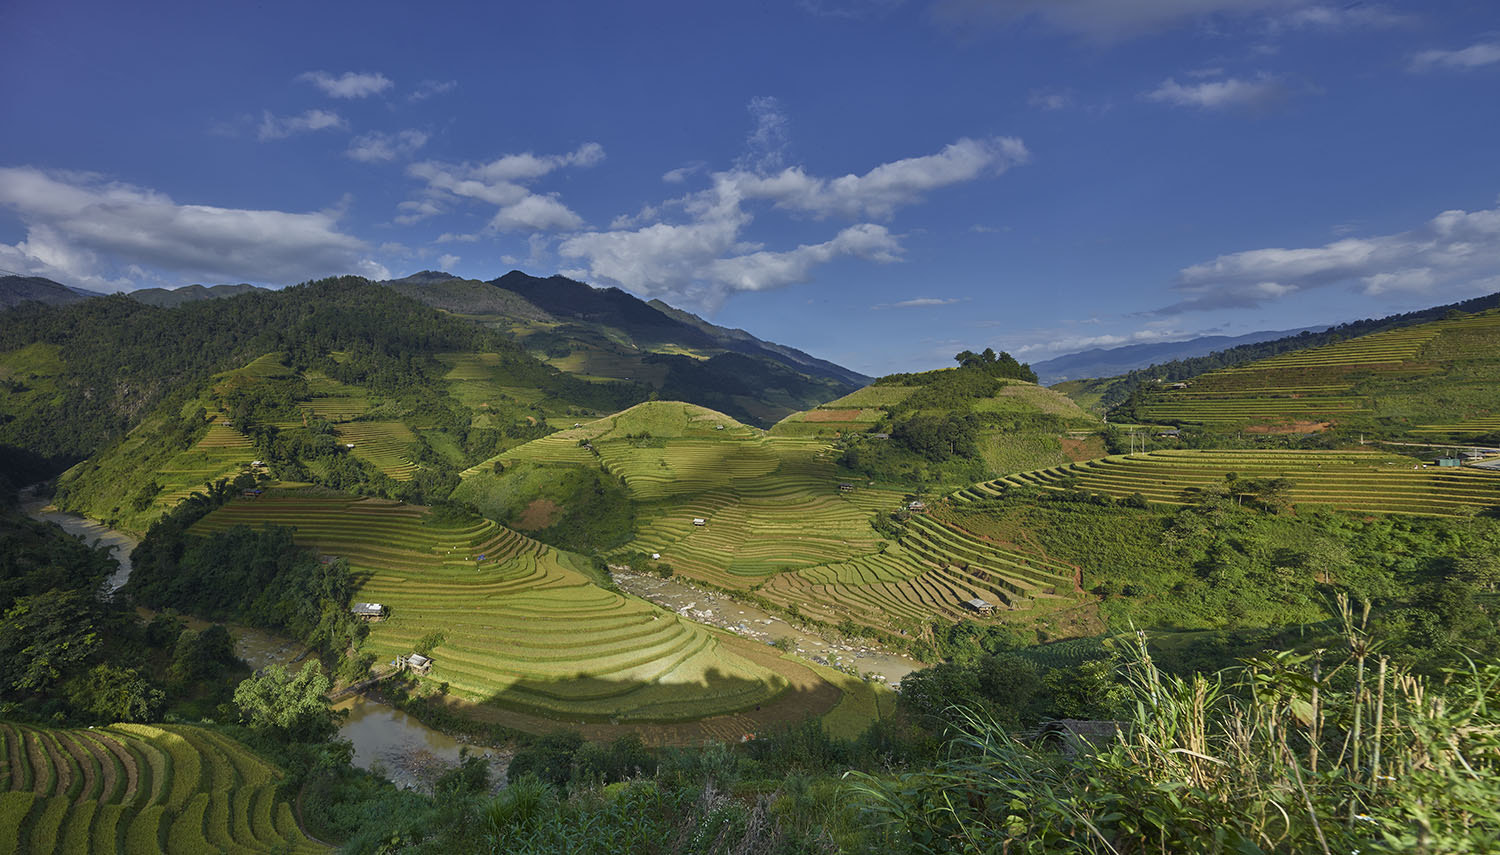 Phase One IQ260 sample photo. Mu cang chai north vietnam - the arena of the rise paddies photography